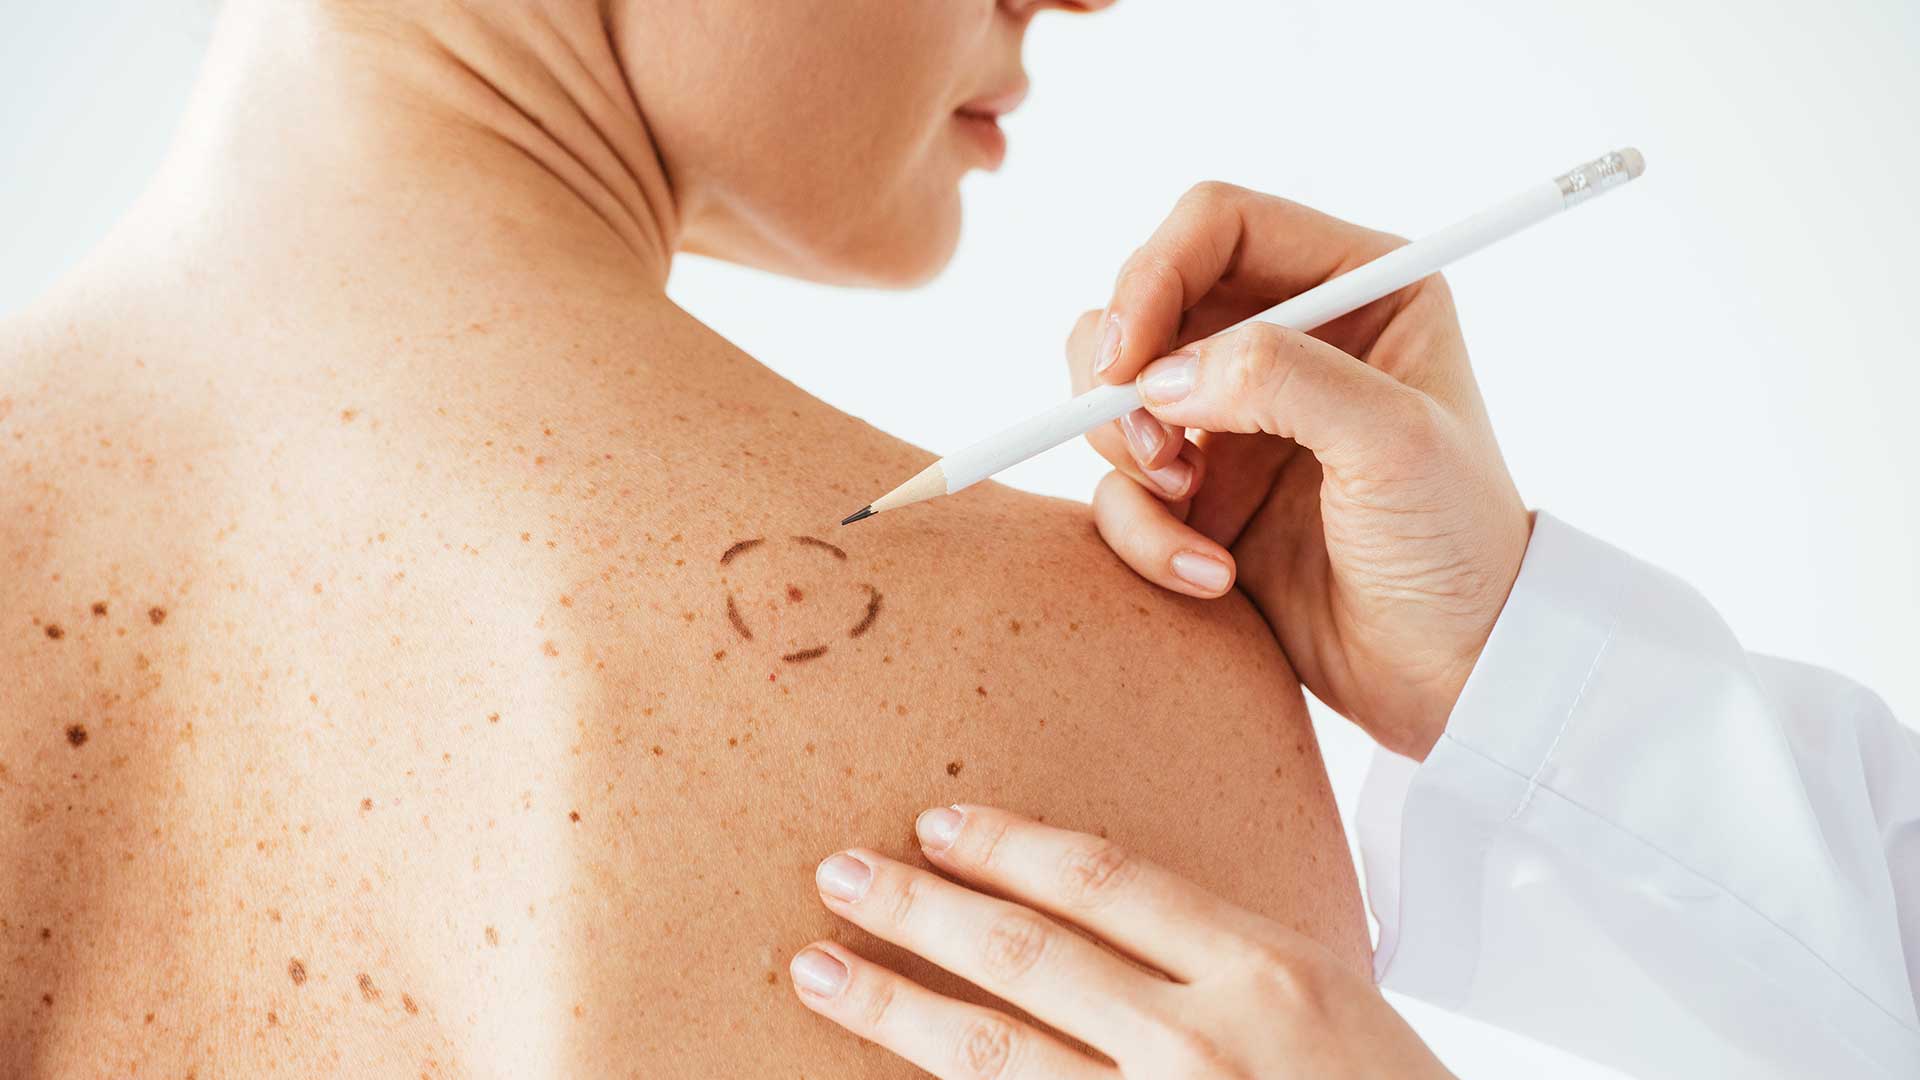 mole-surgical-removal-treatment.jpg